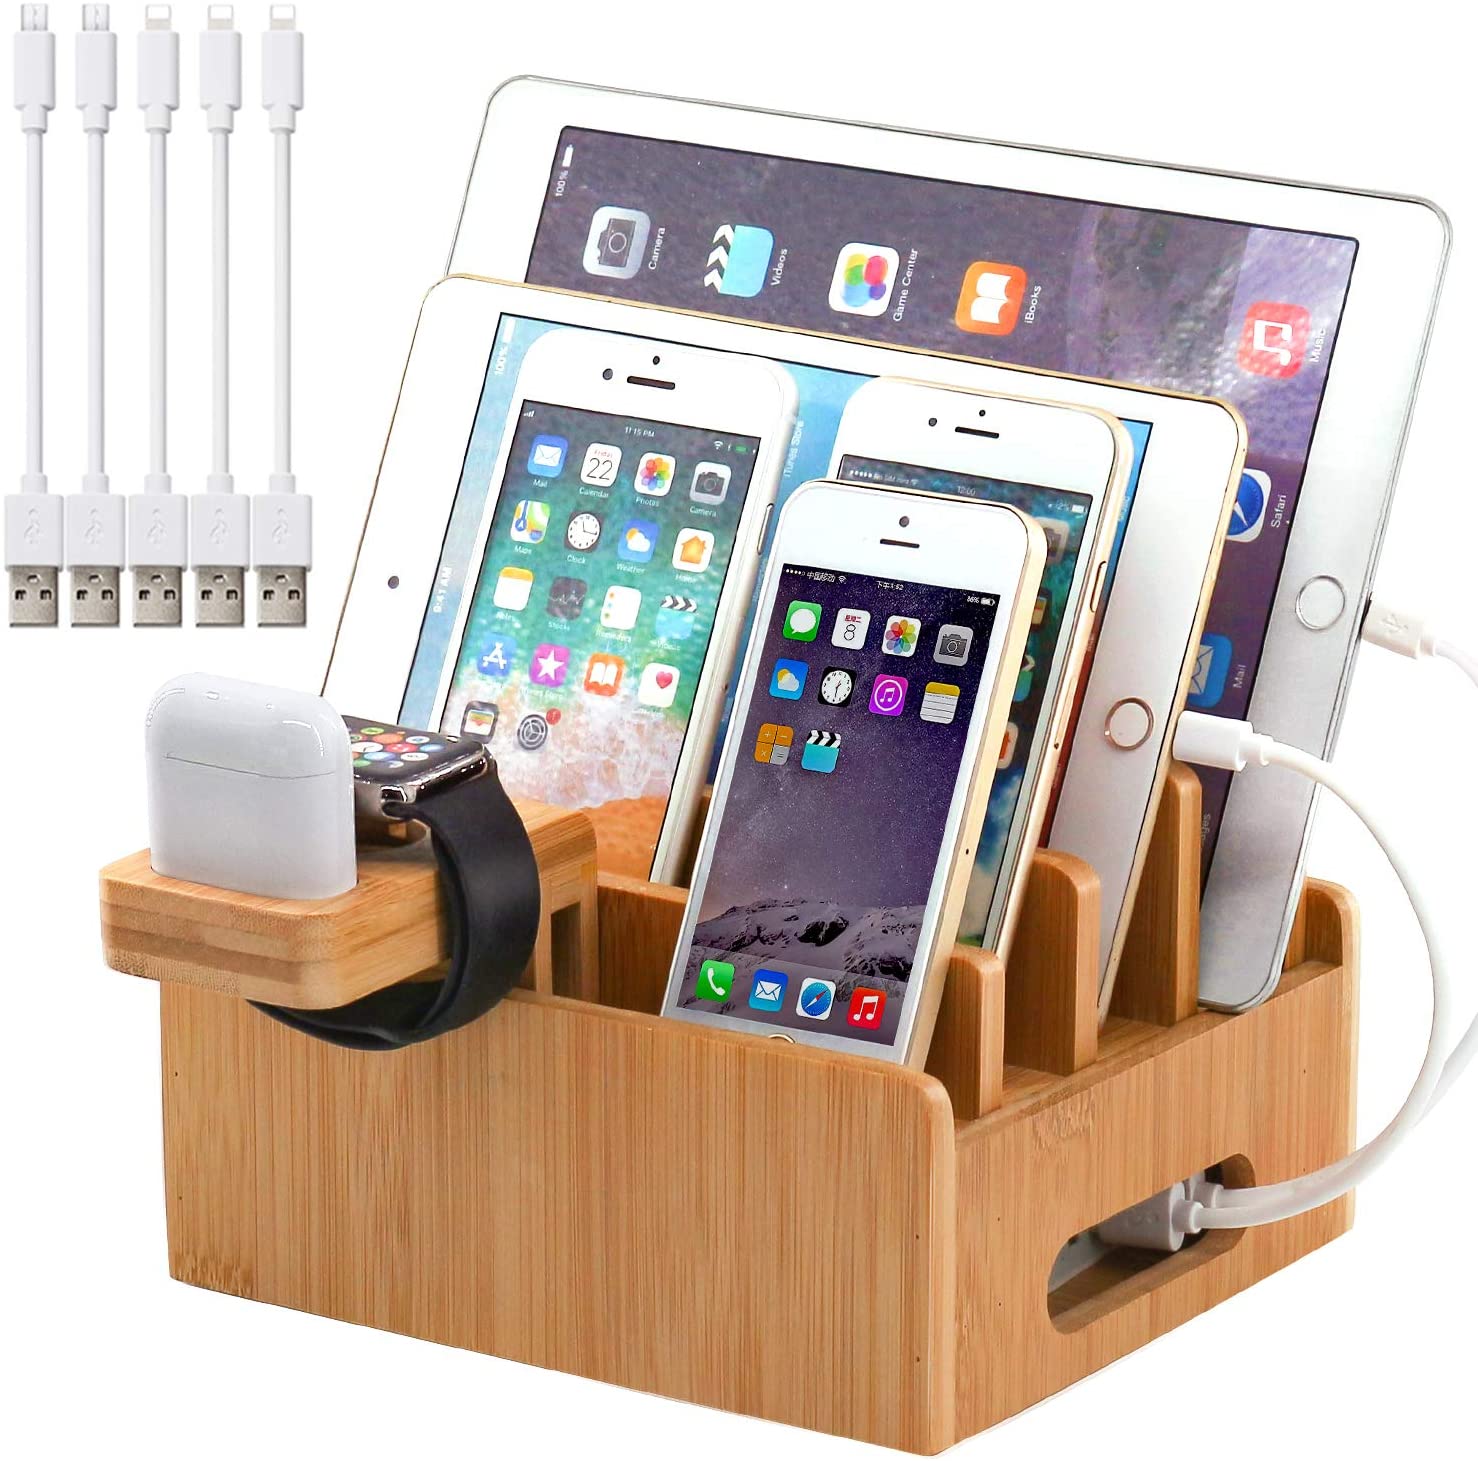 Bamboo Wood Charging Station - WorkwearToronto.com - Christmas Gift Ideas for 2020 - Corporate Gifts - Amazon